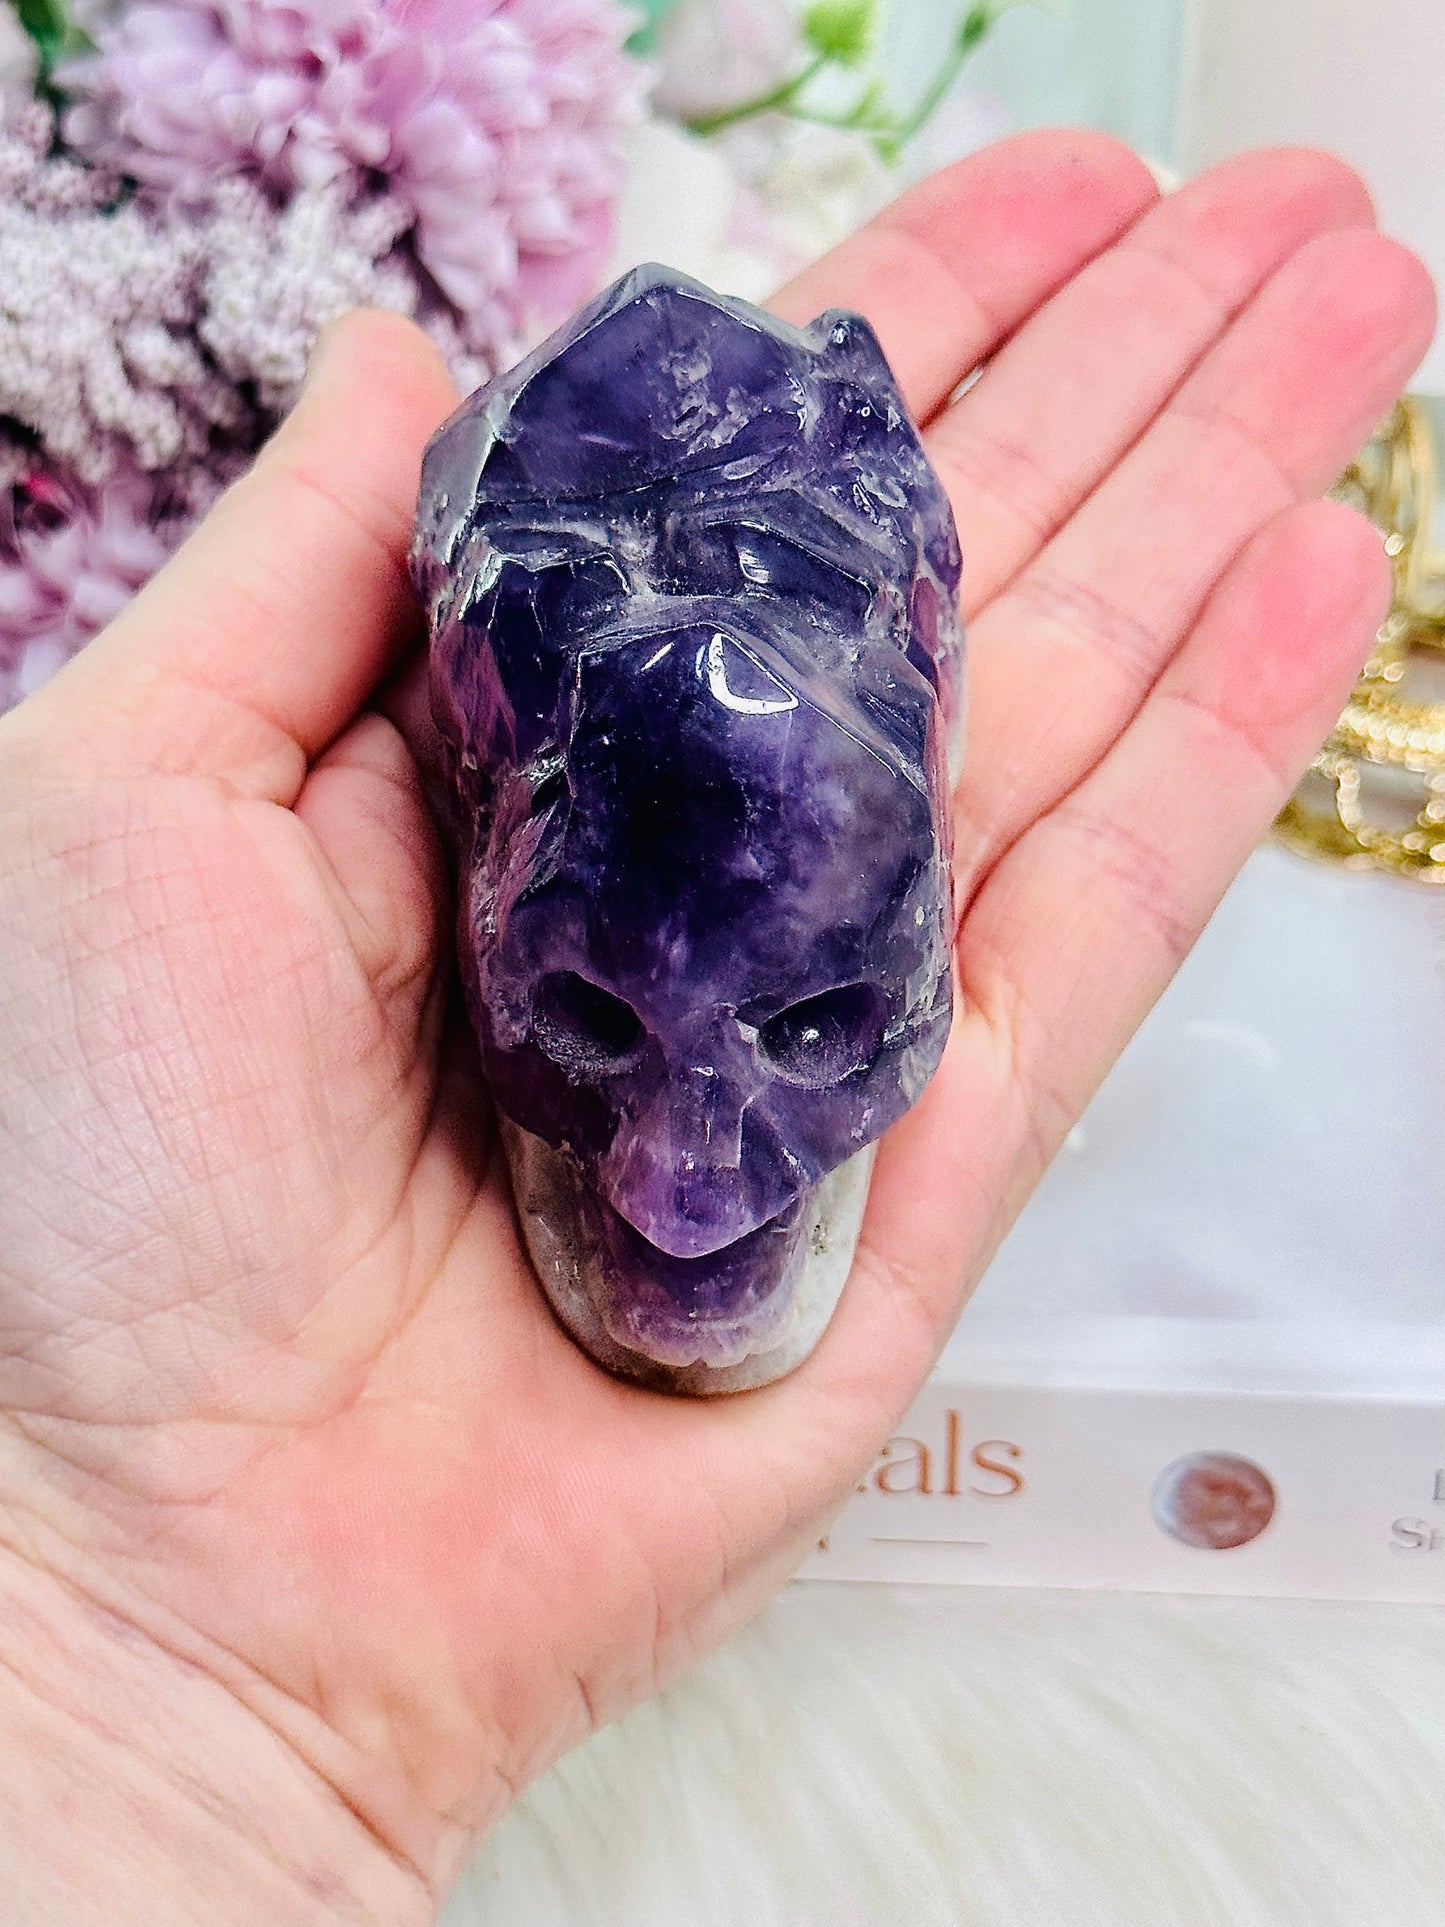 Gorgeous Amethyst Cluster Skull Carving